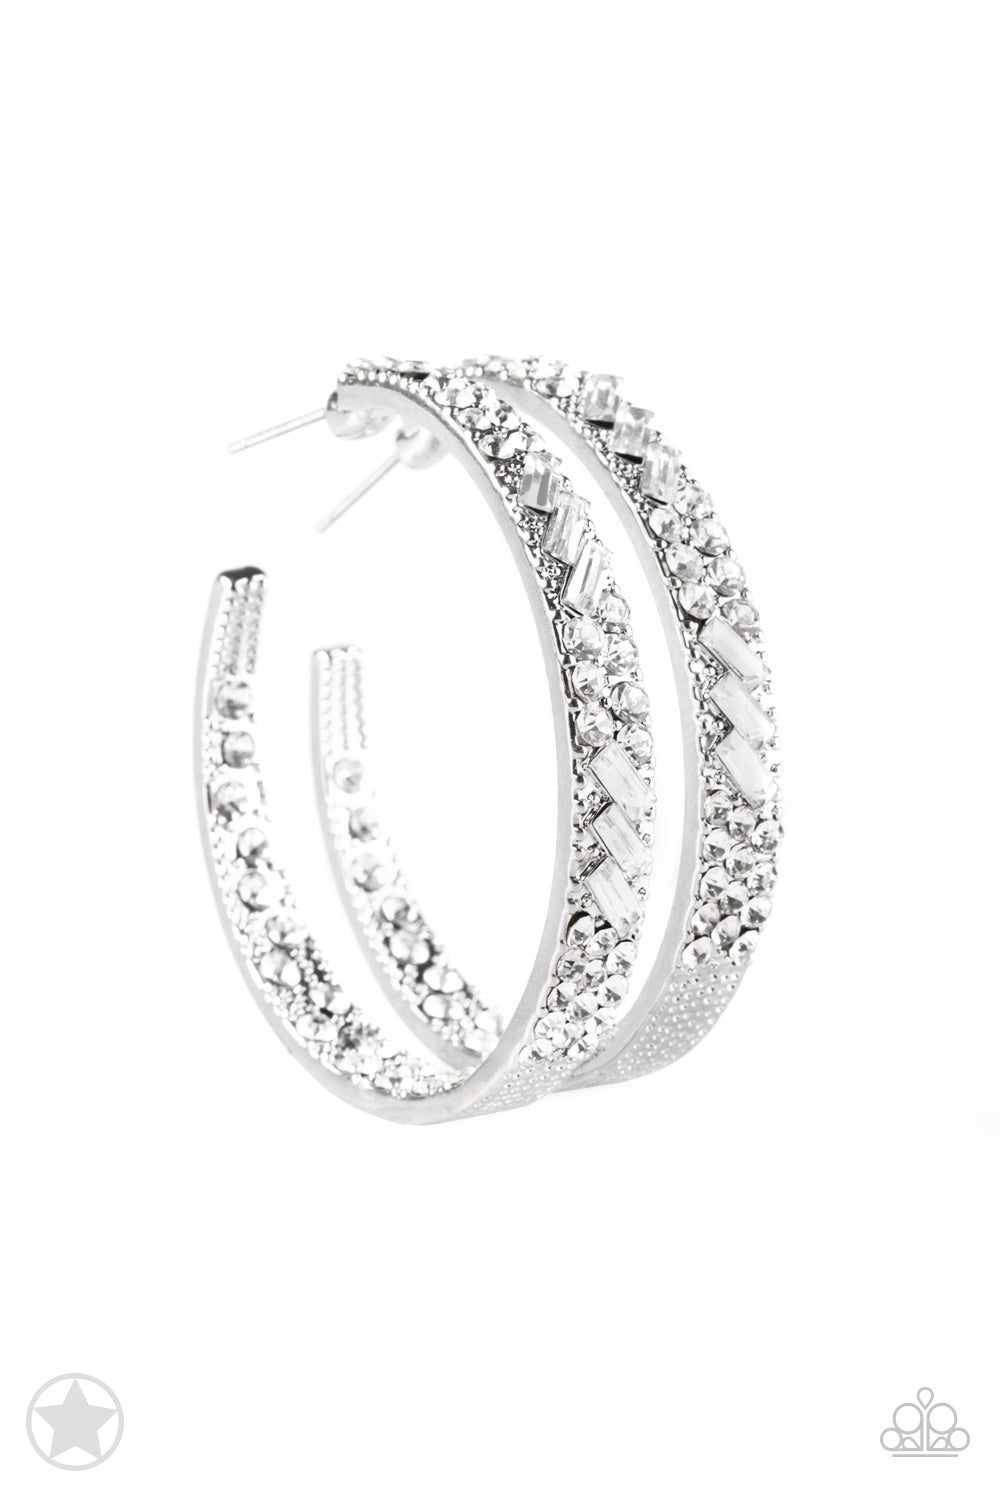 Paparazzi Accessories Glitzy By Association - White Blockbuster Earrings - Lady T Accessories